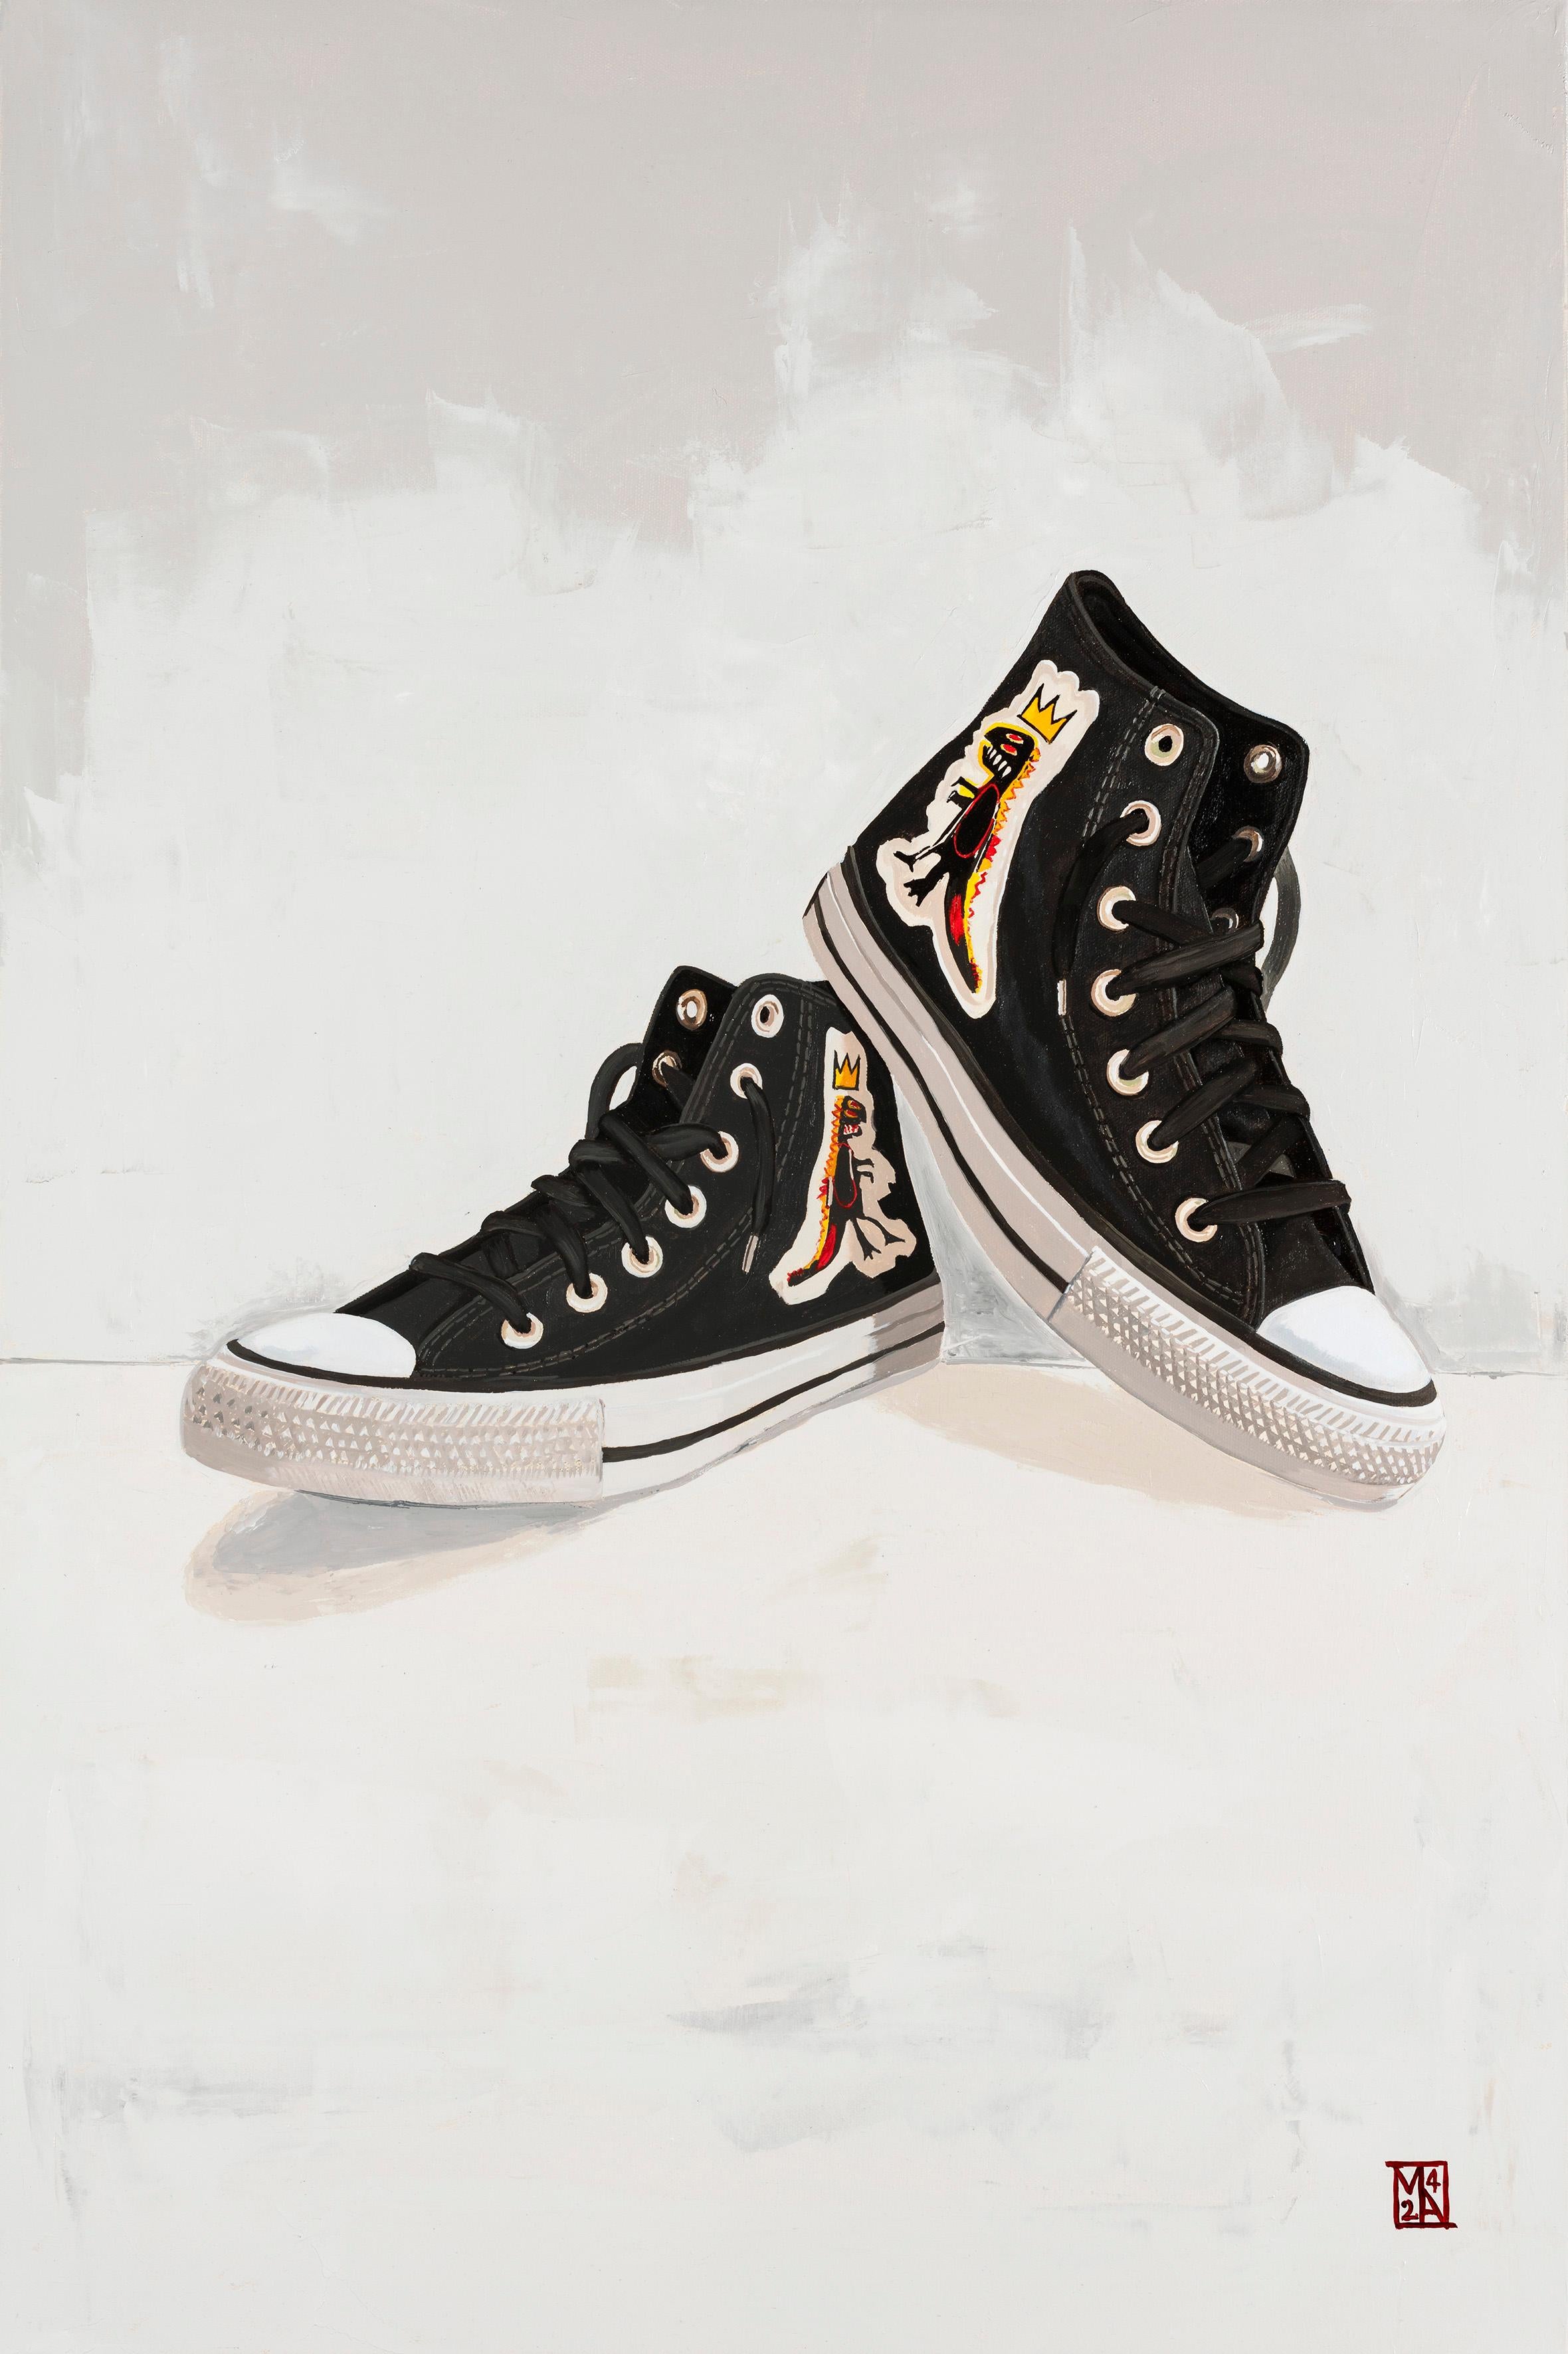 The sixth in a series of worn out Chuck Taylor Basquiat Converse Trainers. This time with a pair of my Converse Basquiat sneakers. Titled ‘Life Imitates Art III’ these sneakers feature the classic Basquiat dinosaur wearing Basquiats signature crown